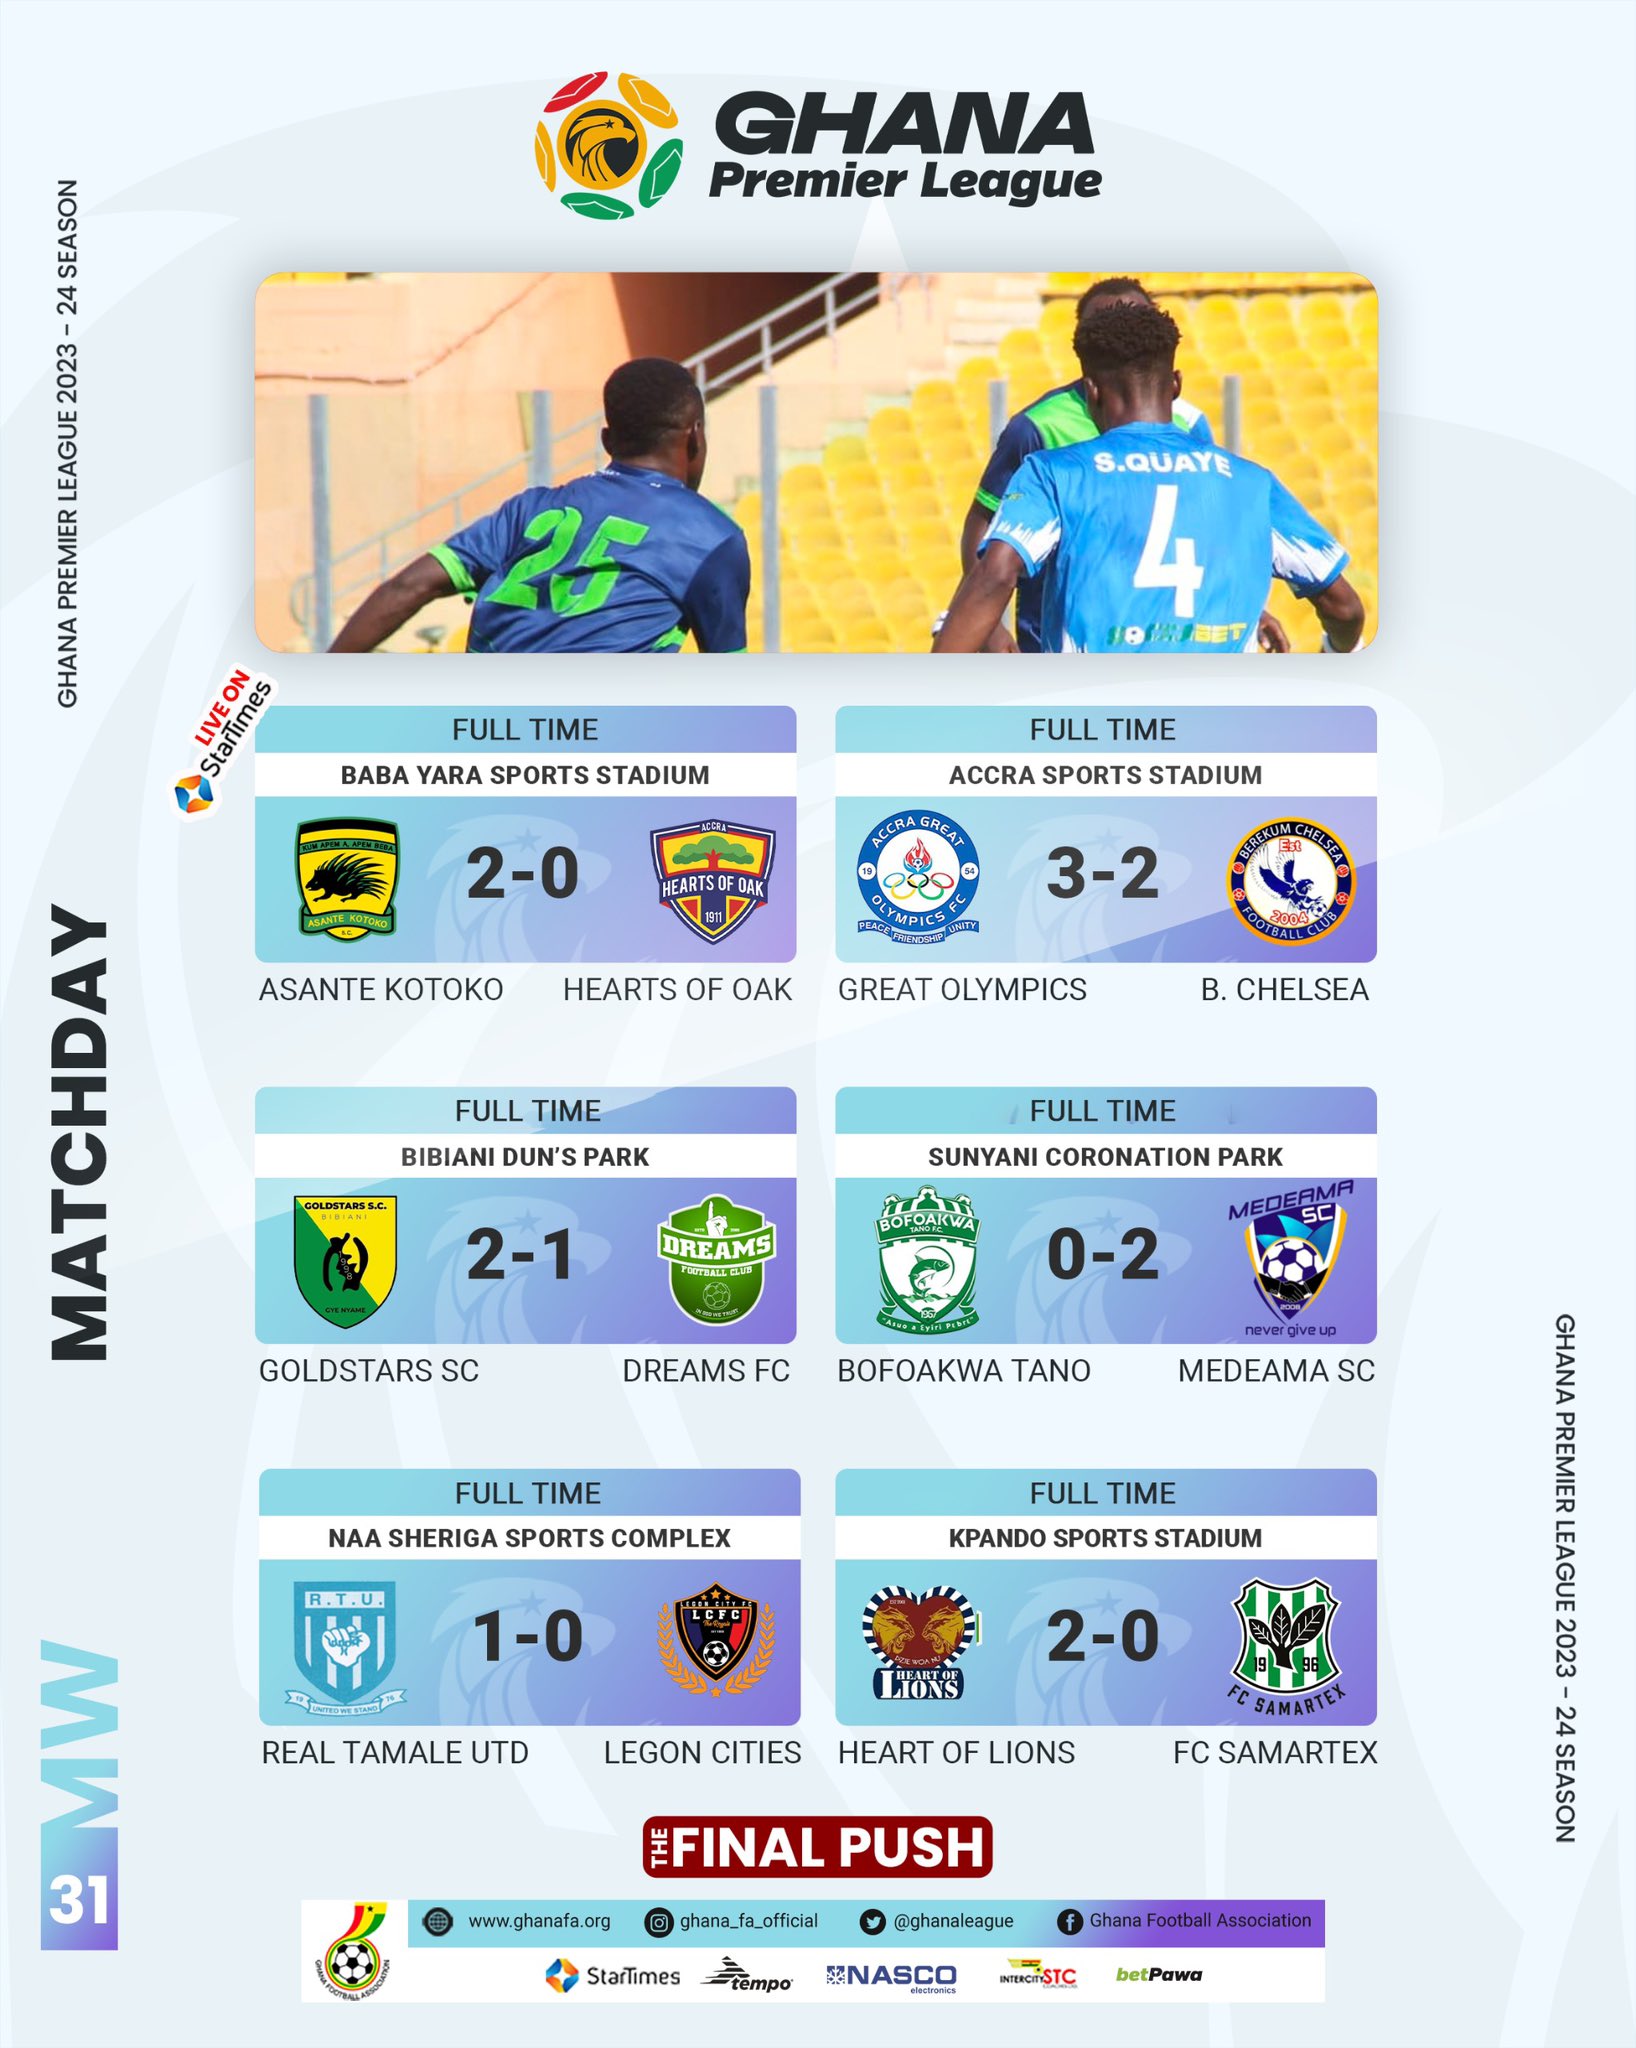 GPL Sunday Wrap-Up: Medeama move within six points of FC Samartex;  Heart of Lions, Great Olympics bag crucial wins